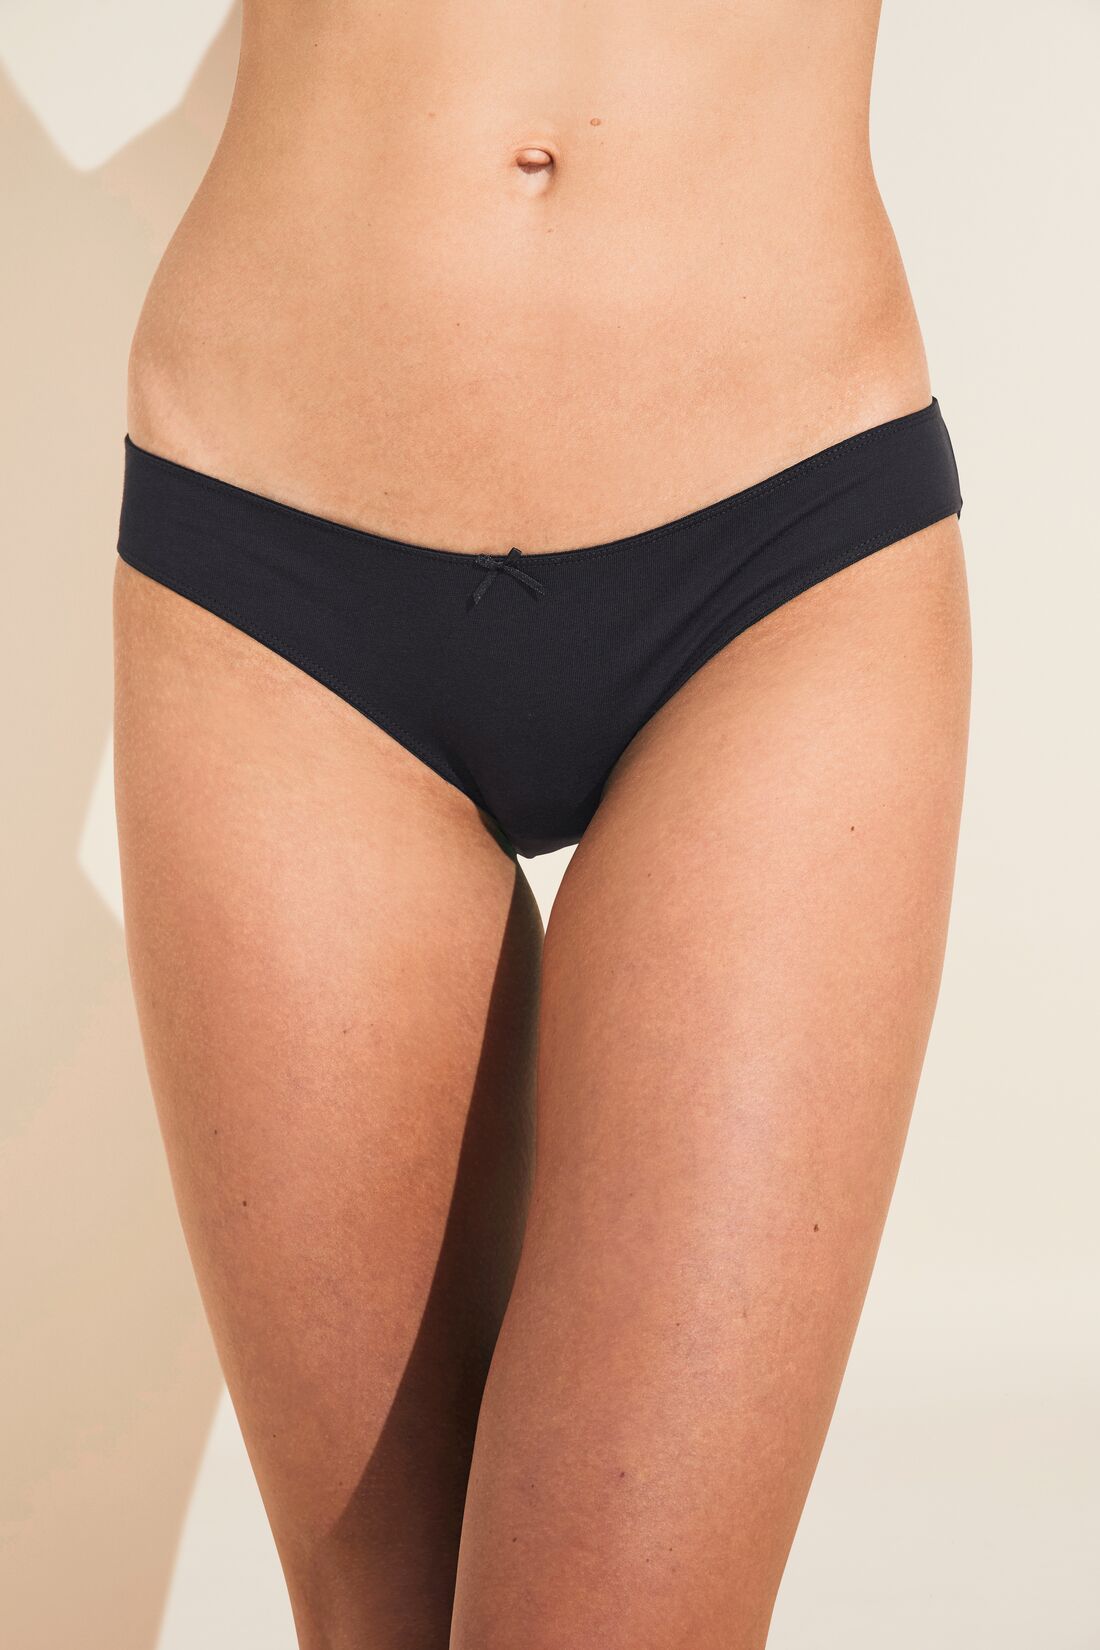 I Replaced My Entire Underwear Drawer With These Cotton Eberjey Pairs